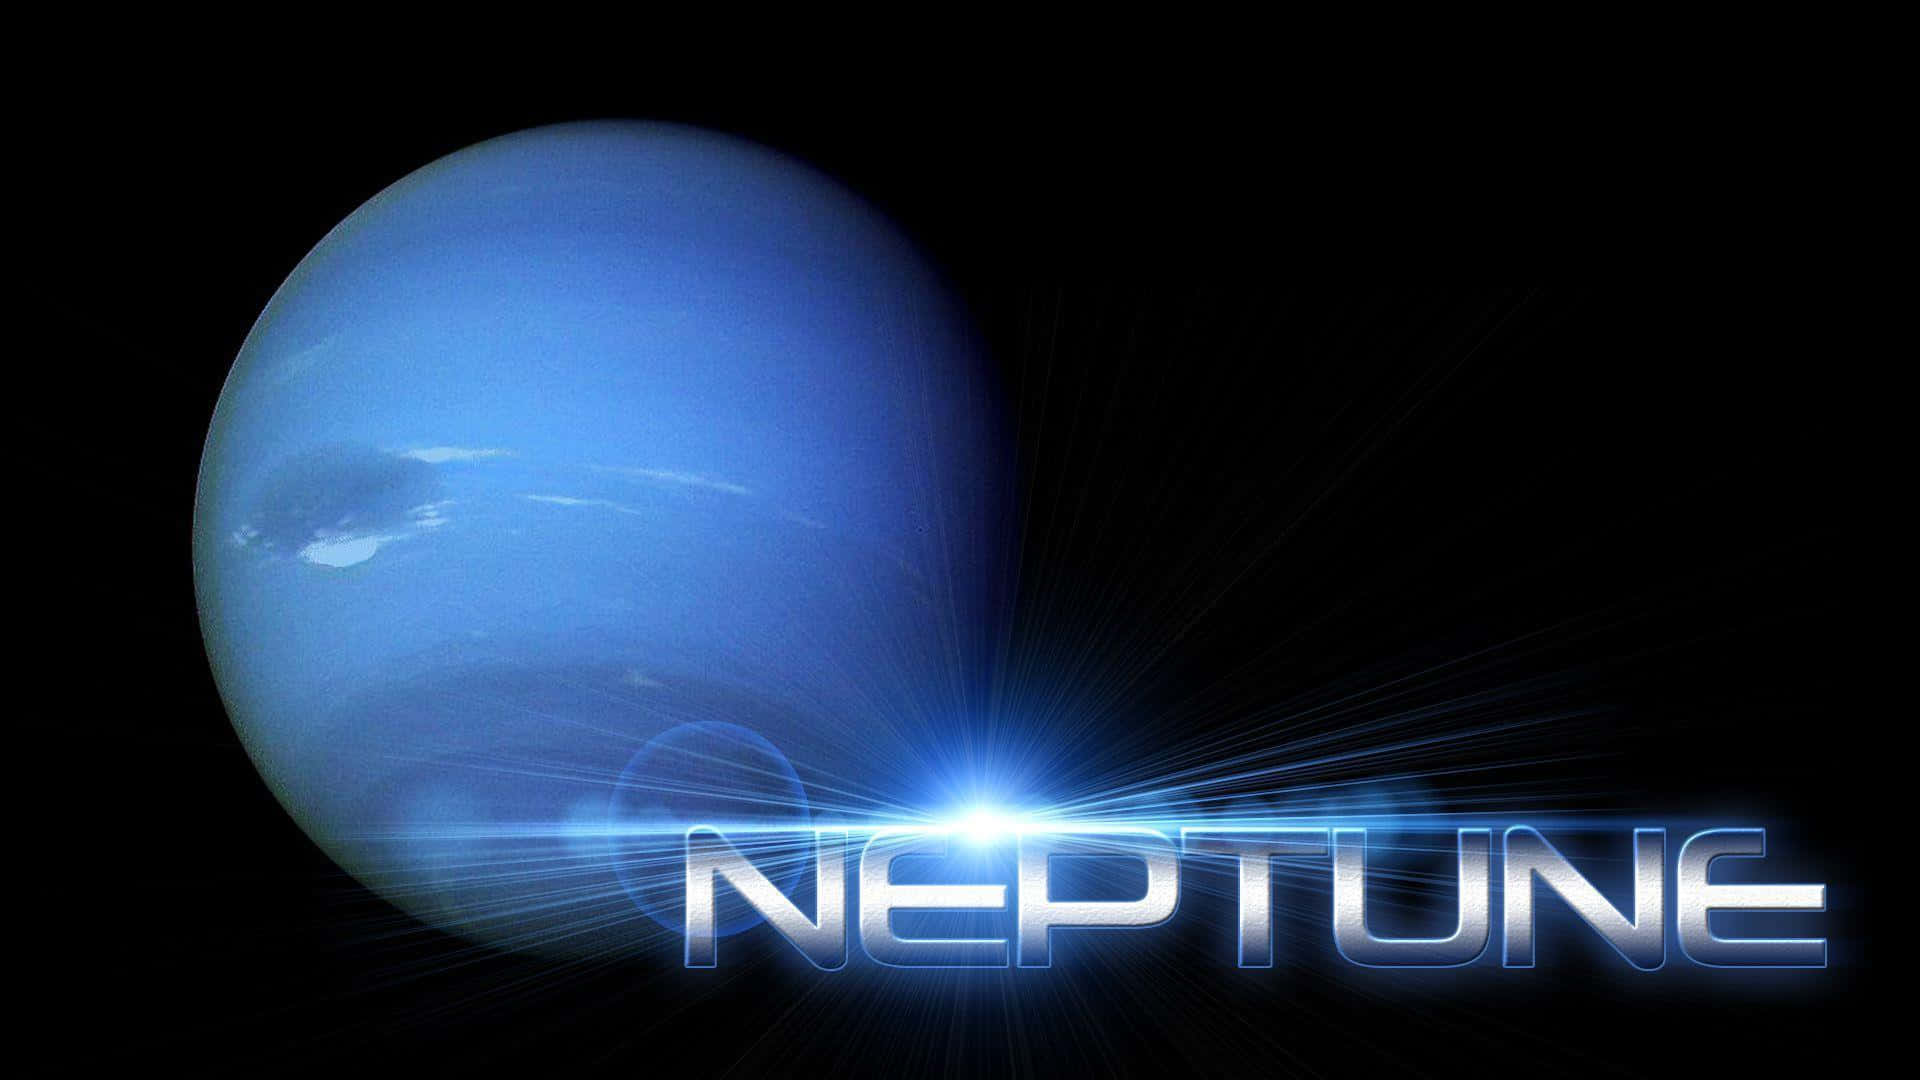 Planet Neptune in all its majestic glory